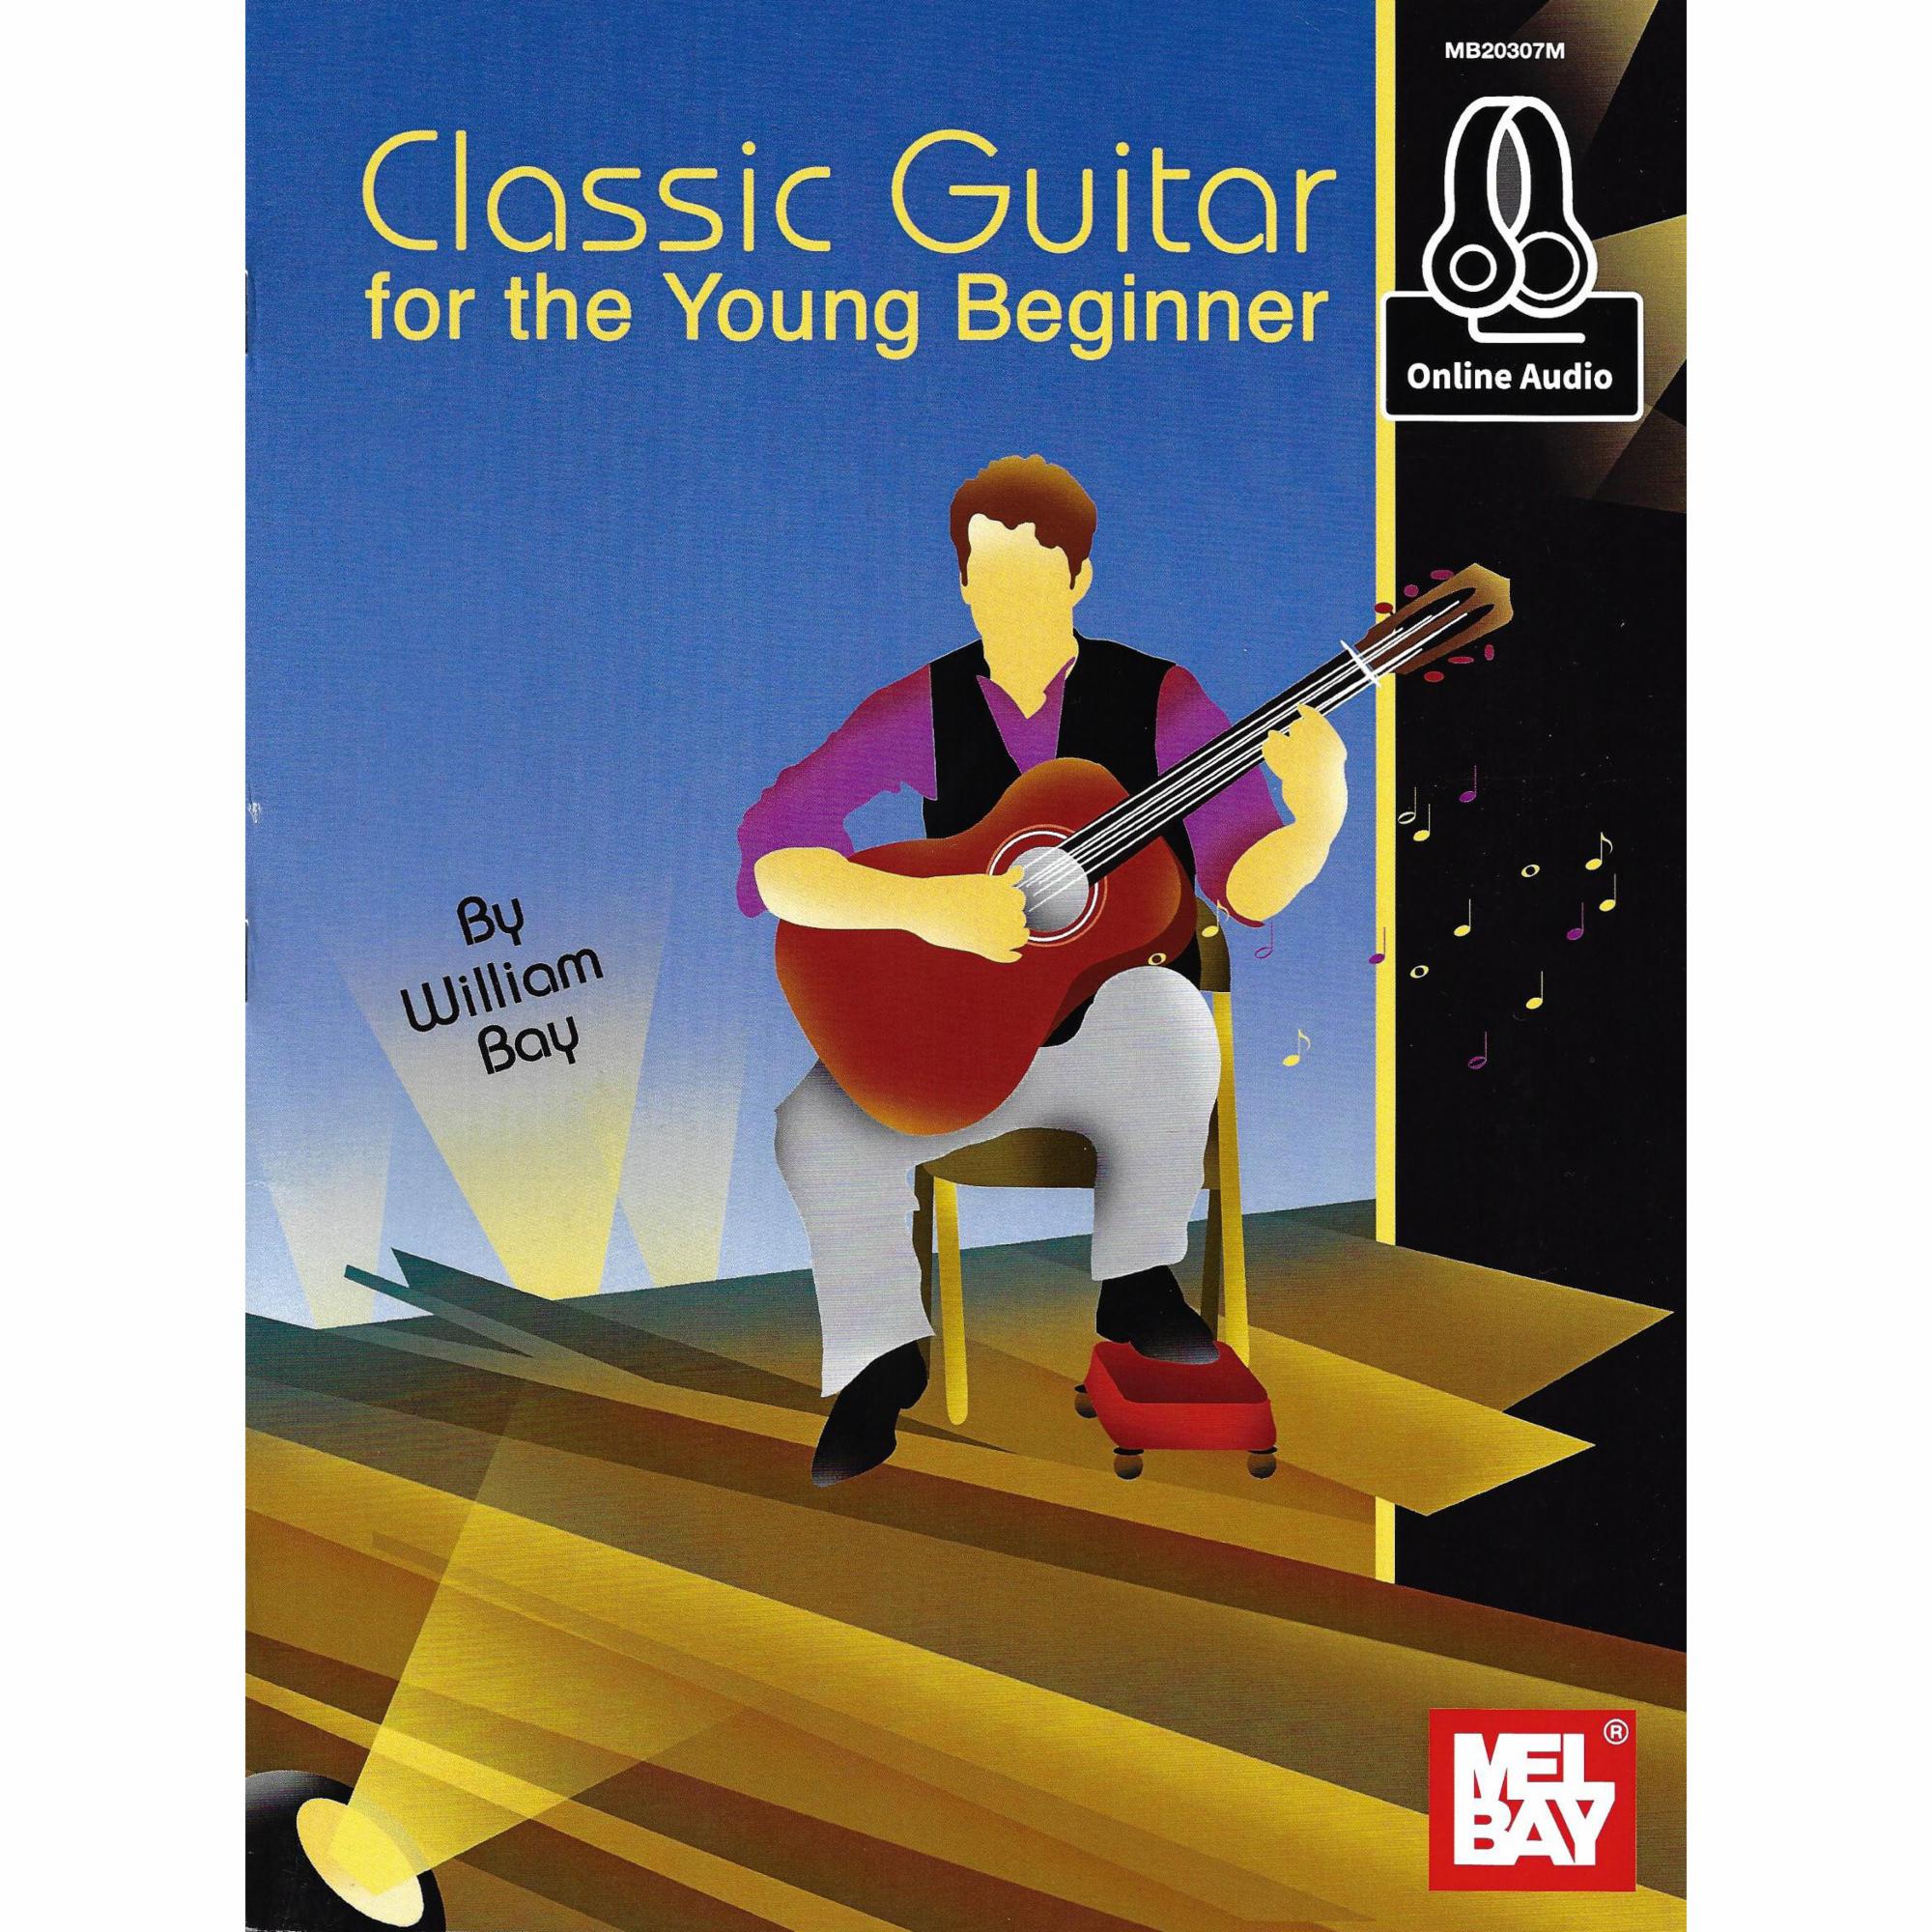 Classic Guitar for the Young Beginner